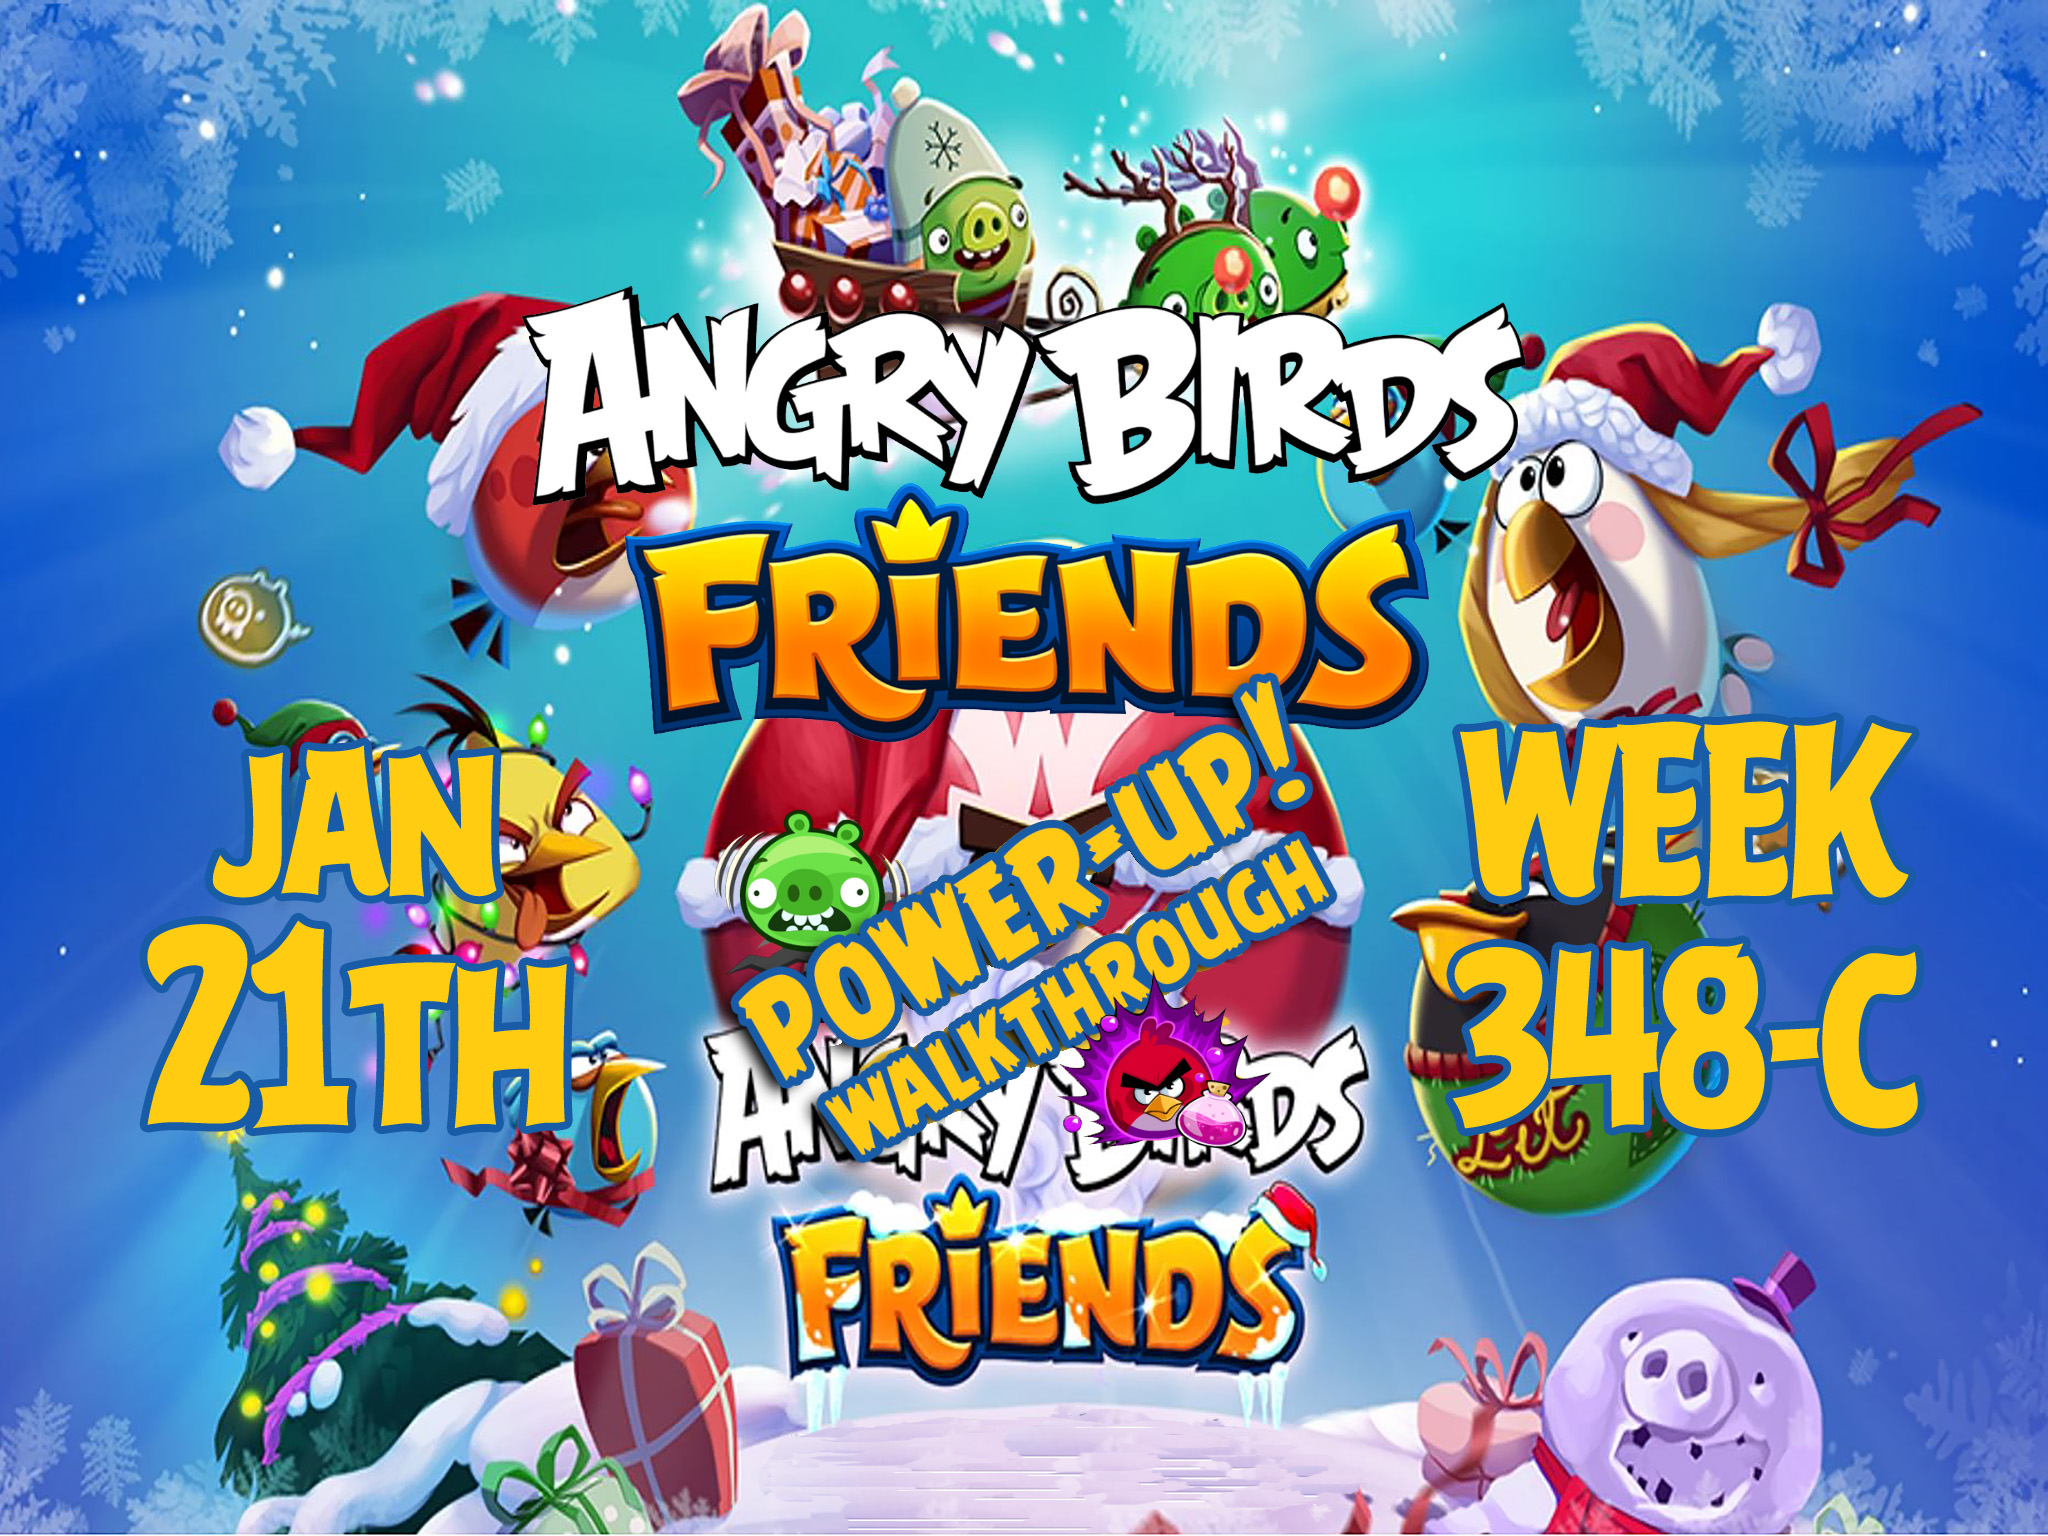 Angry-Birds-Friends-Tournament-Week-348-C-Feature-Image-PU